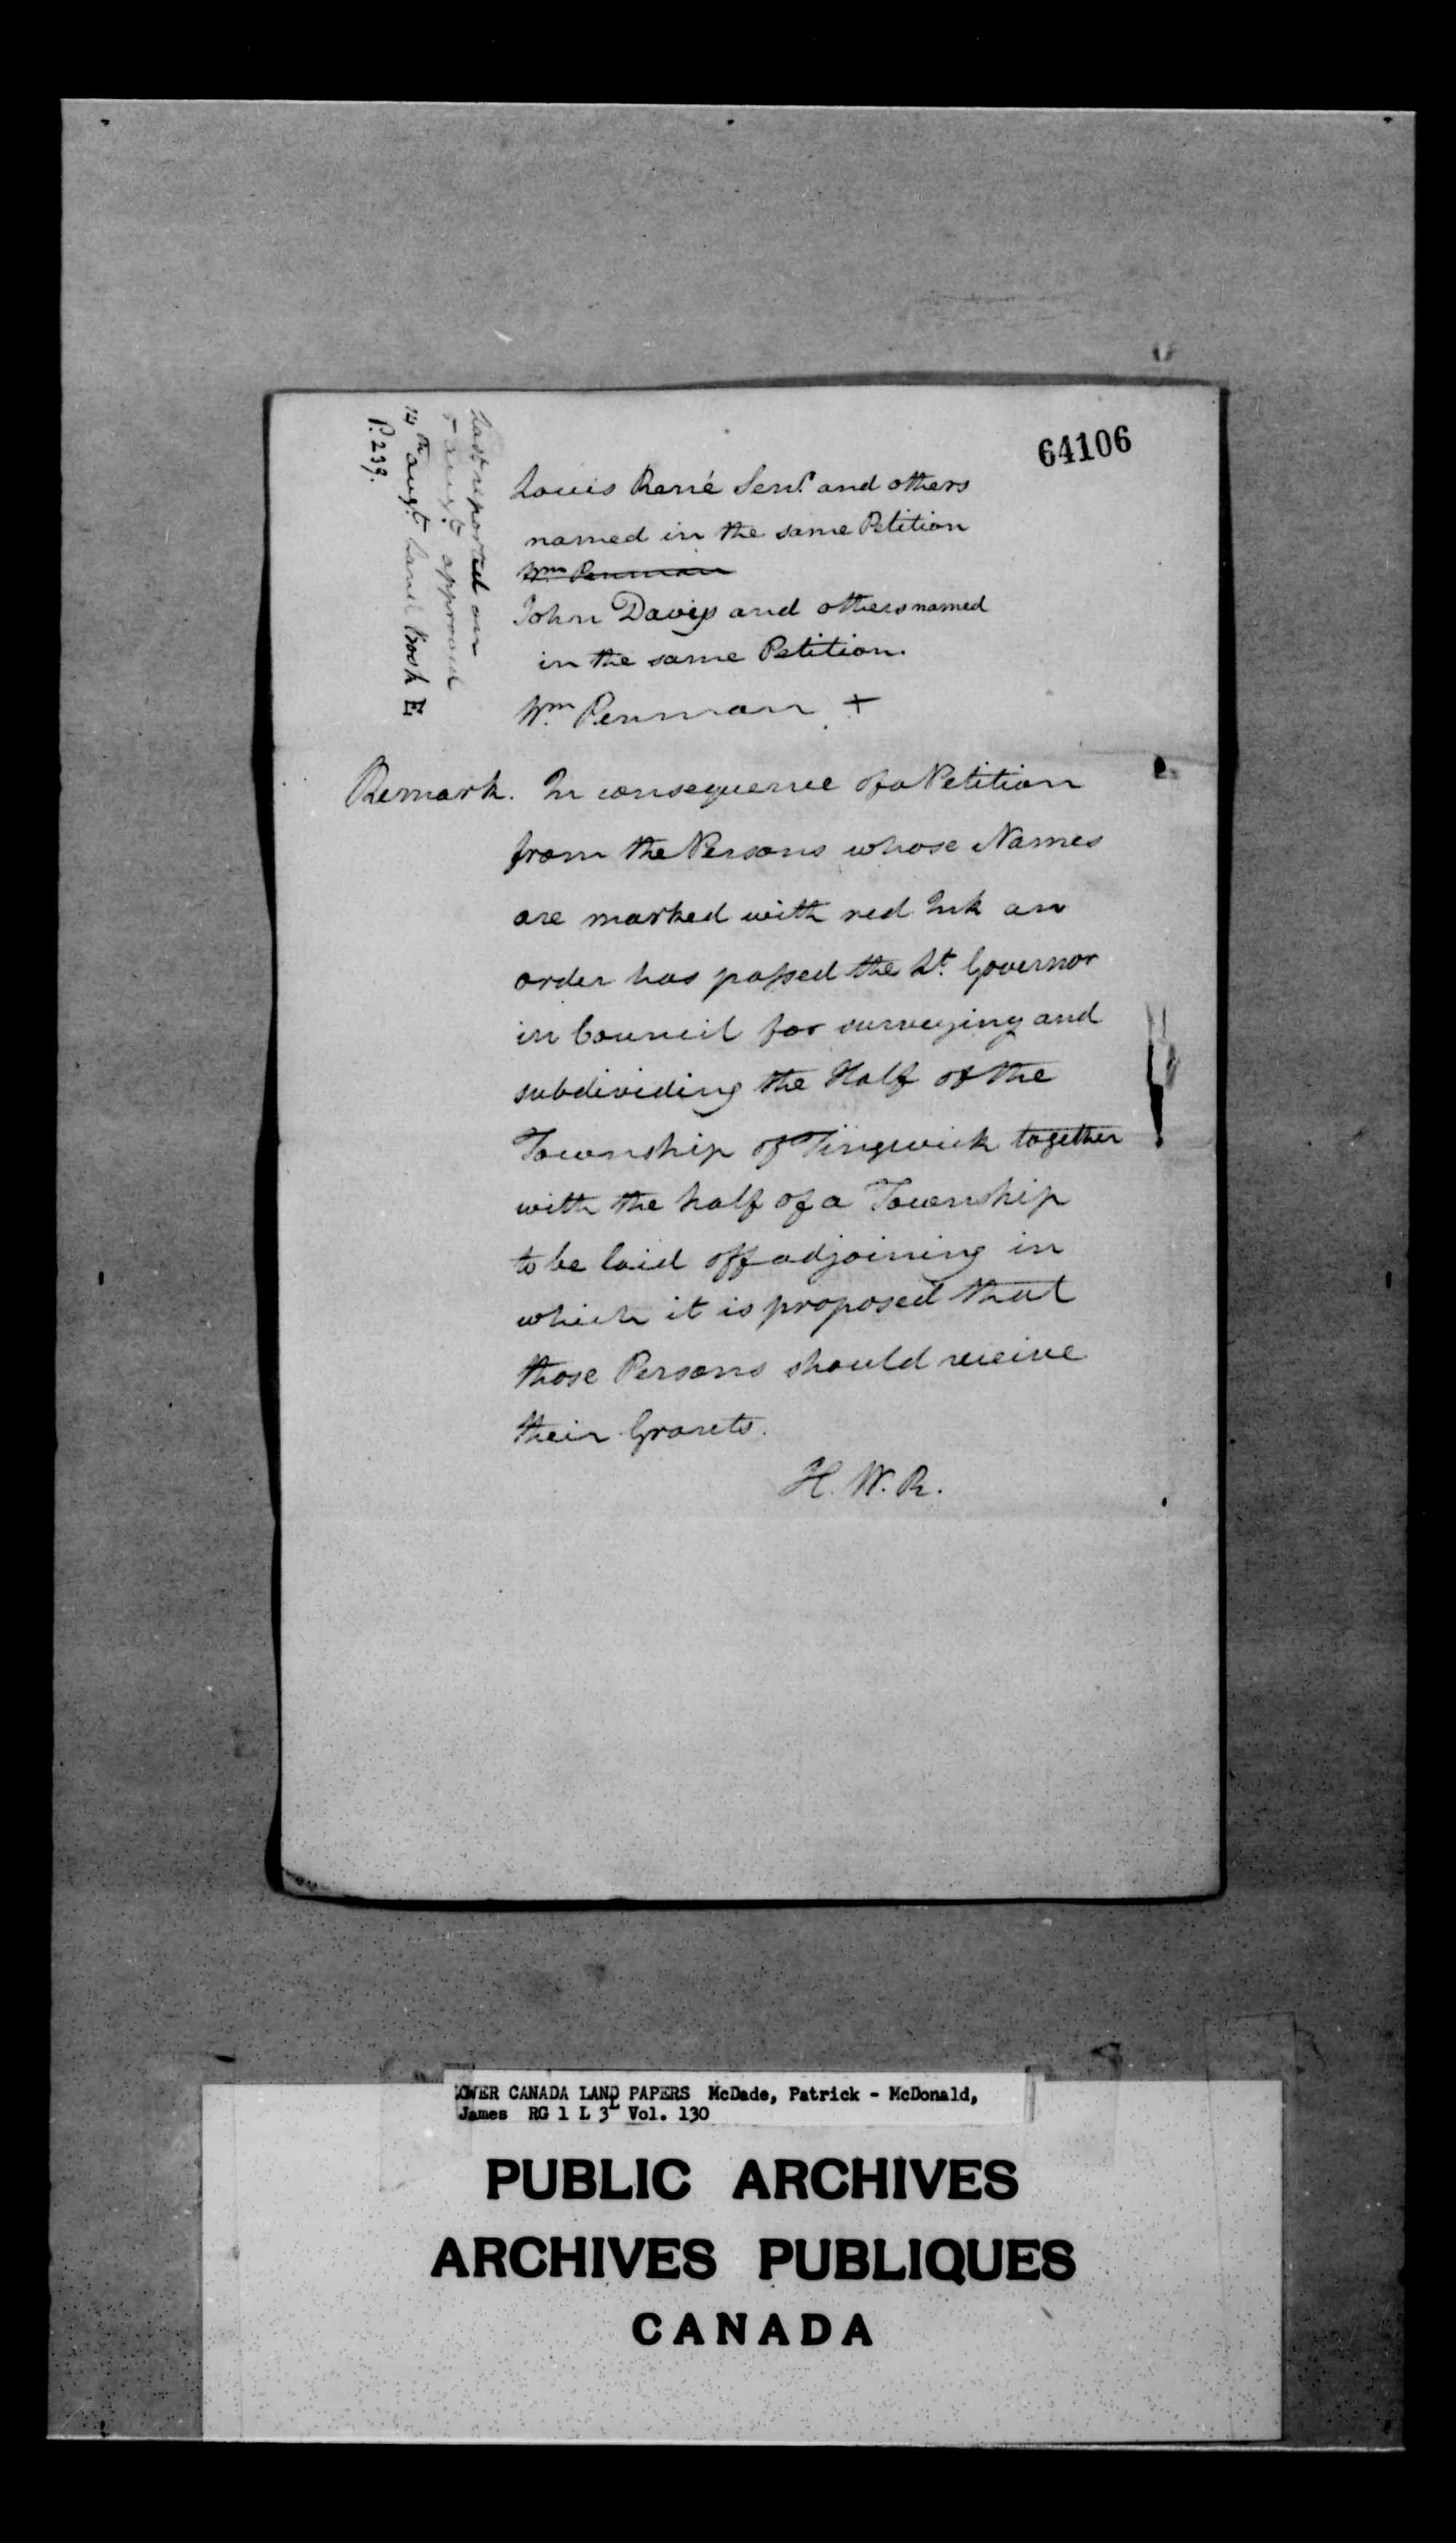 Digitized page of  for Image No.: e008709169